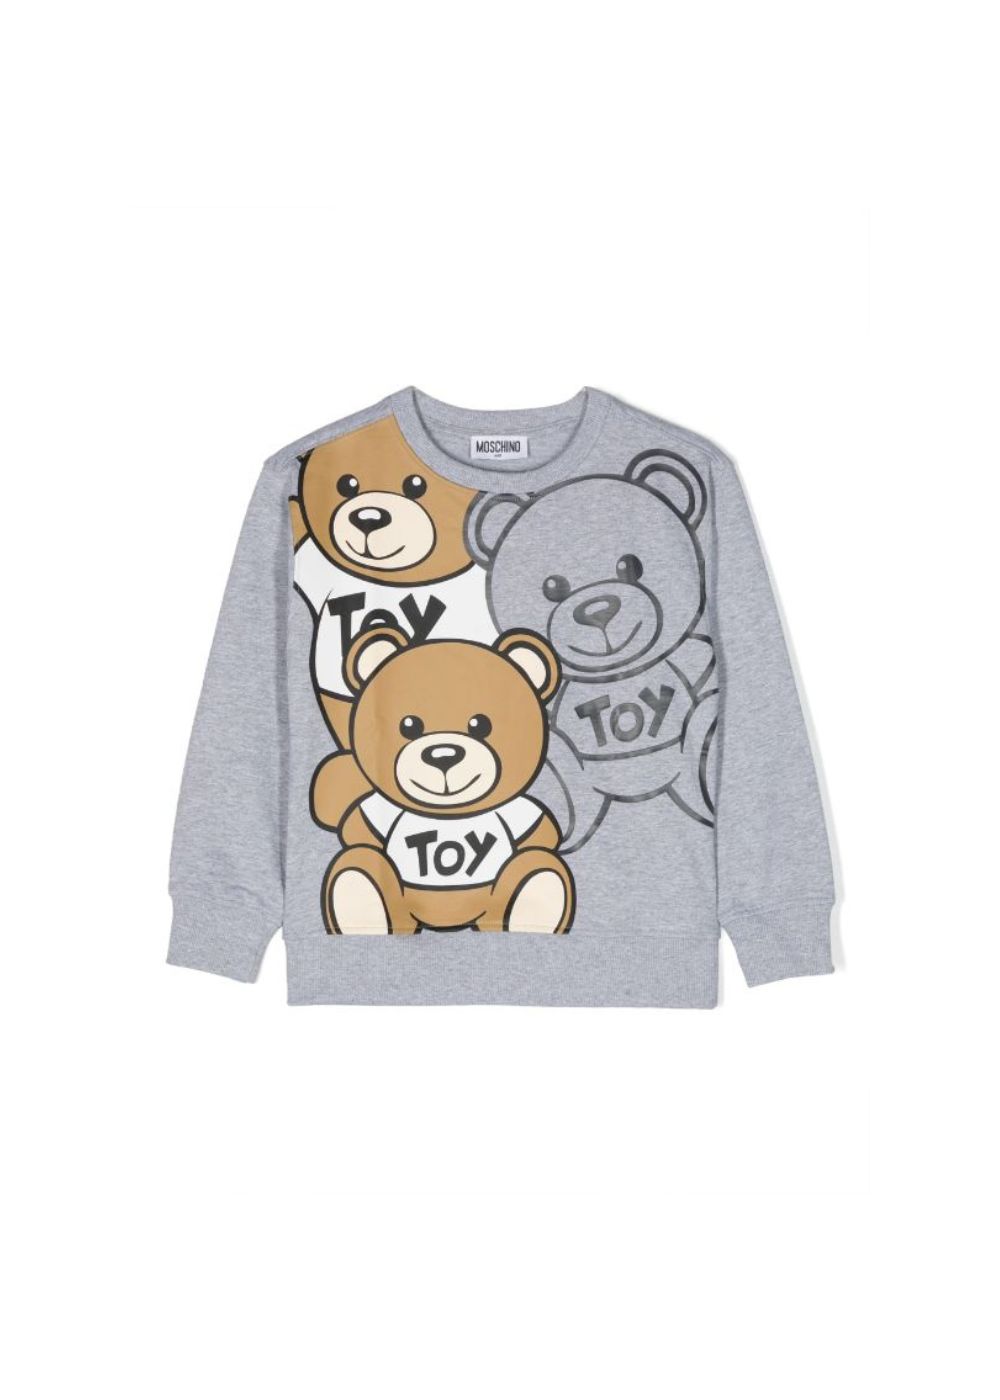 Featured image for “Moschino Felpa con Stampa Teddy Bear”